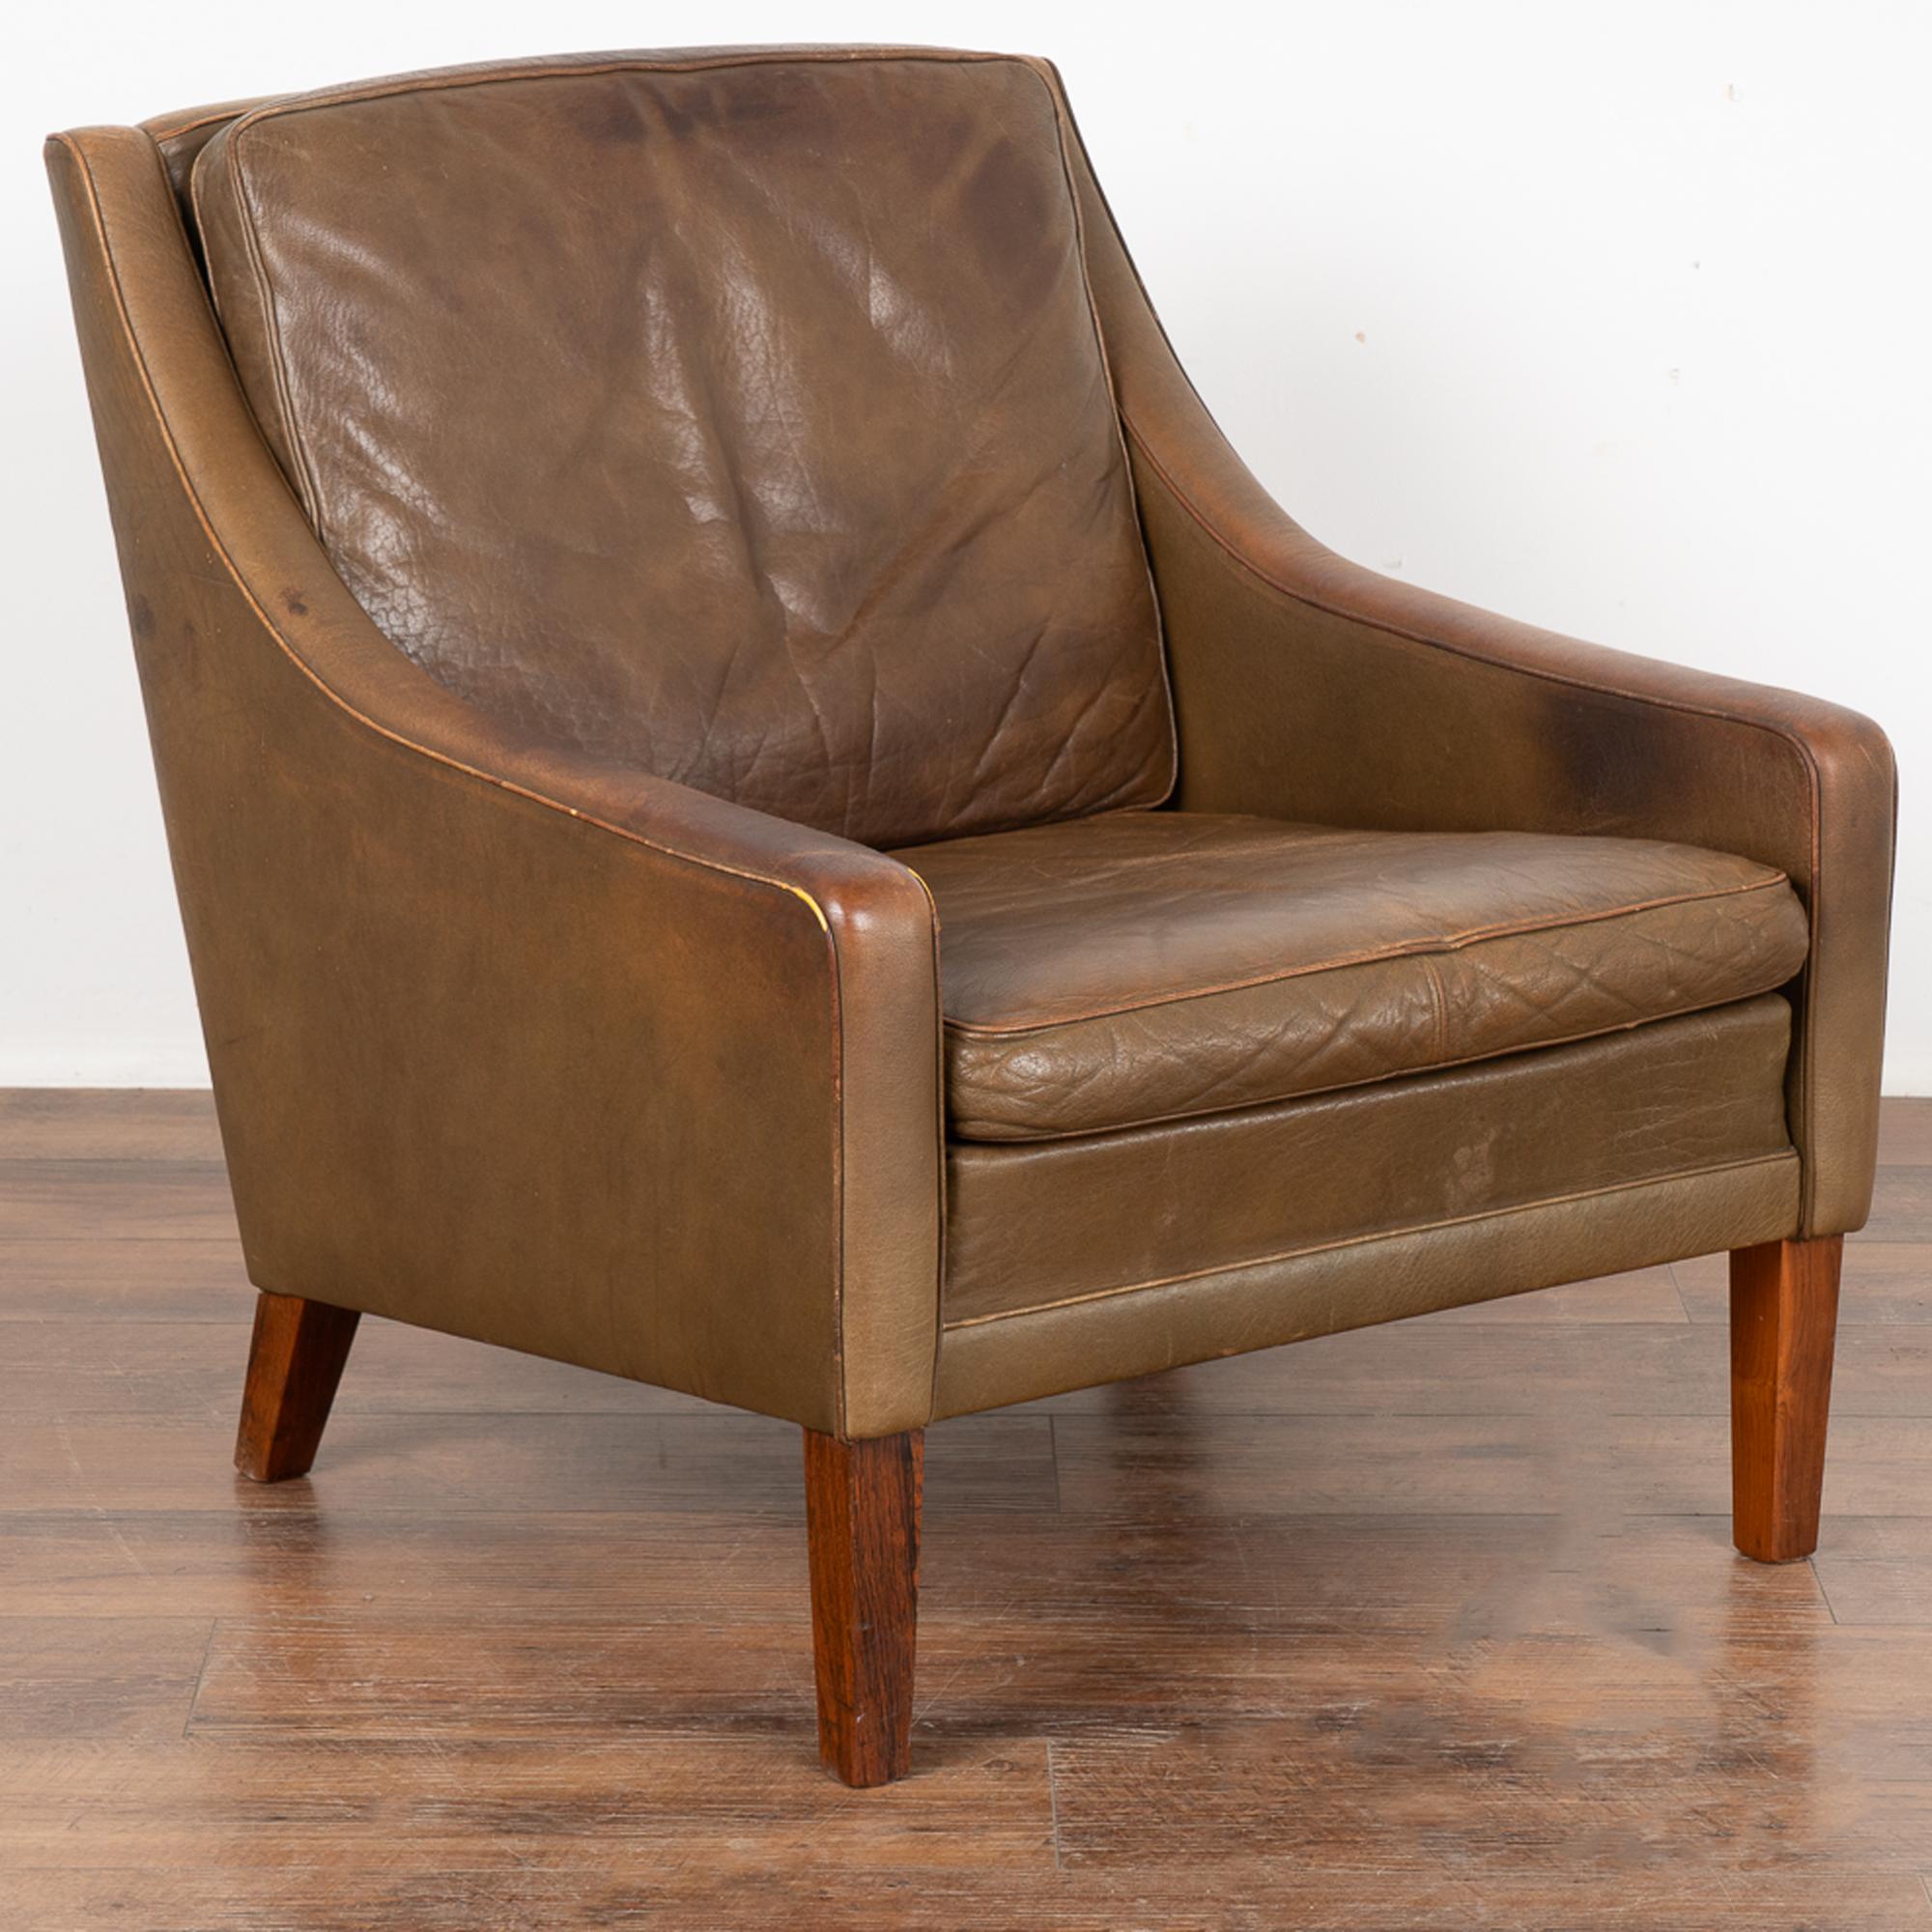 Mid-century modern brown leather arm chair resting on hard wood feet.
Clean modern design with sloping squared arms and removable cushions; these chairs sit comfortably .
Sold in vintage used condition. Leather shows typical signs of wear including